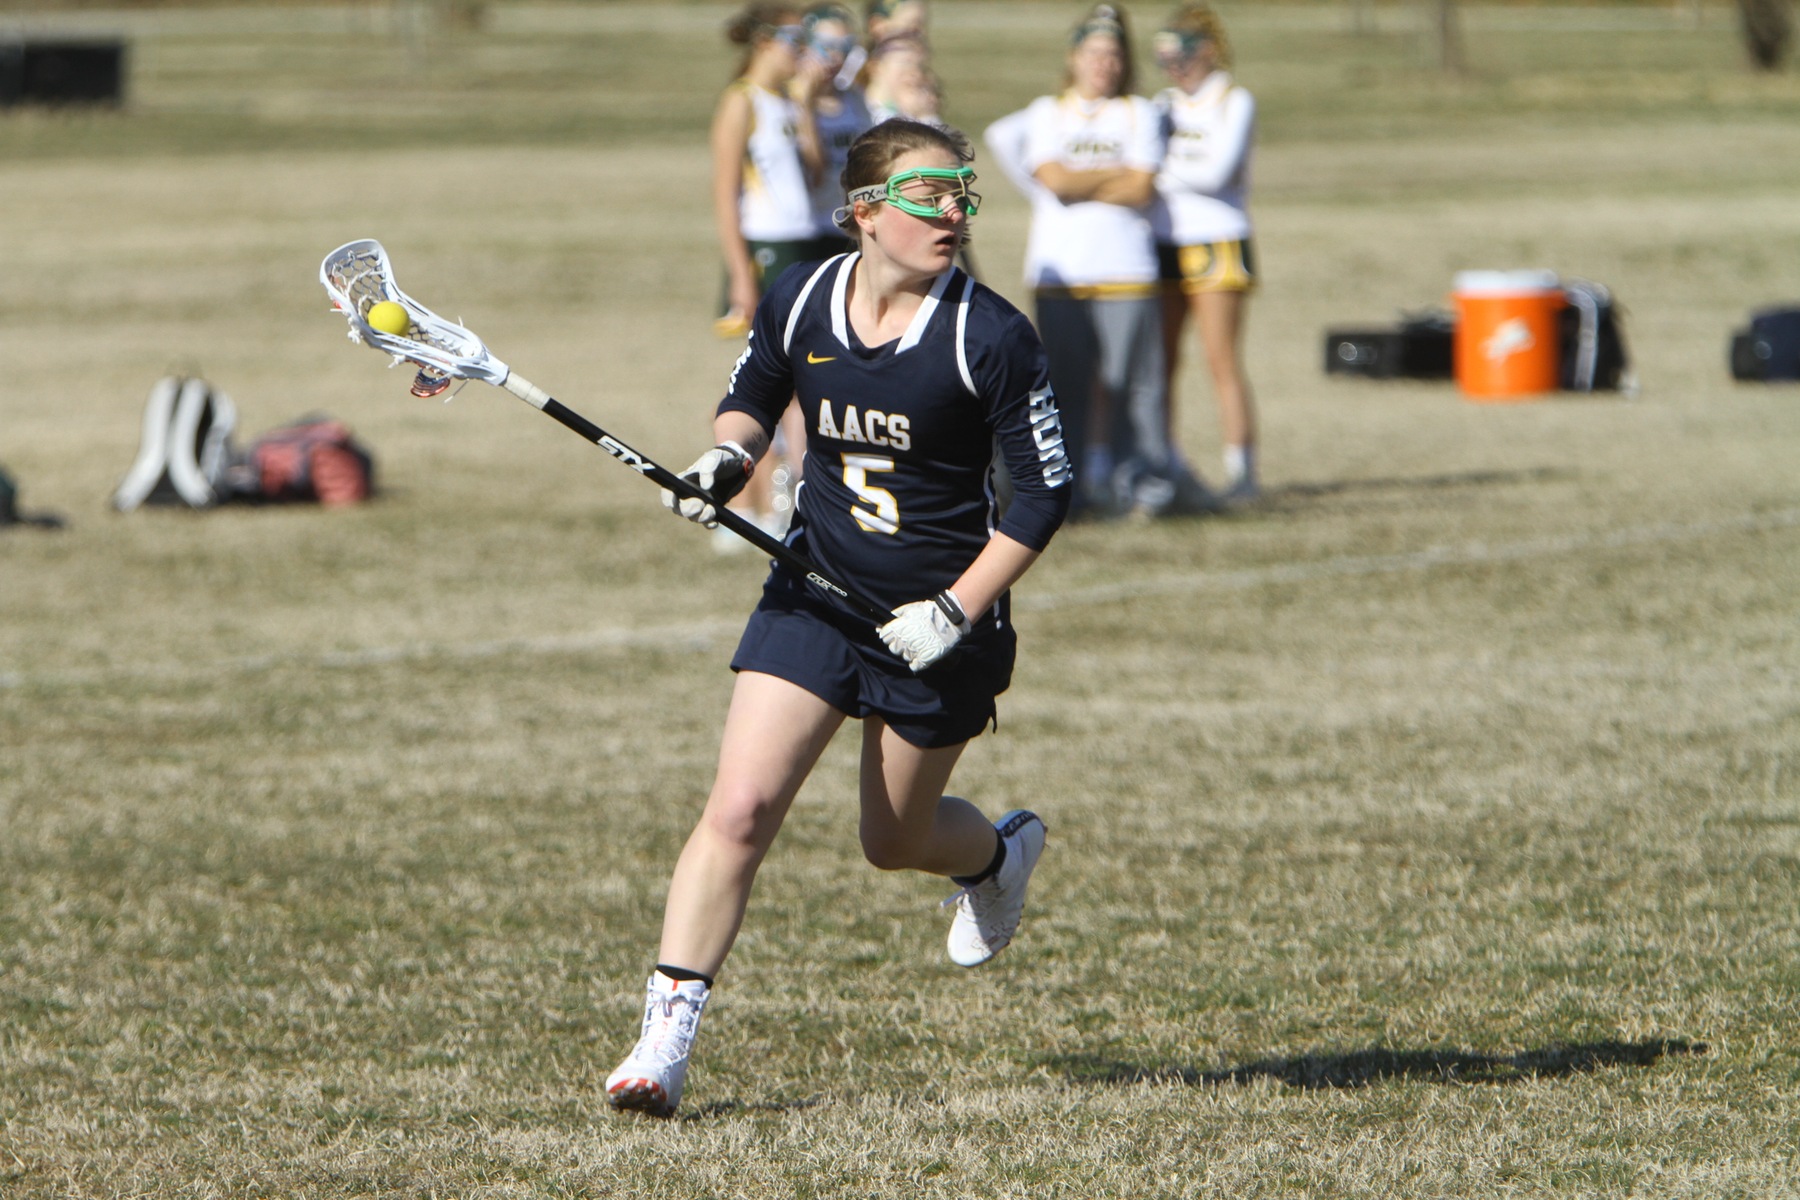 AACS Girls Lacrosse Wins 19-3 Over IND